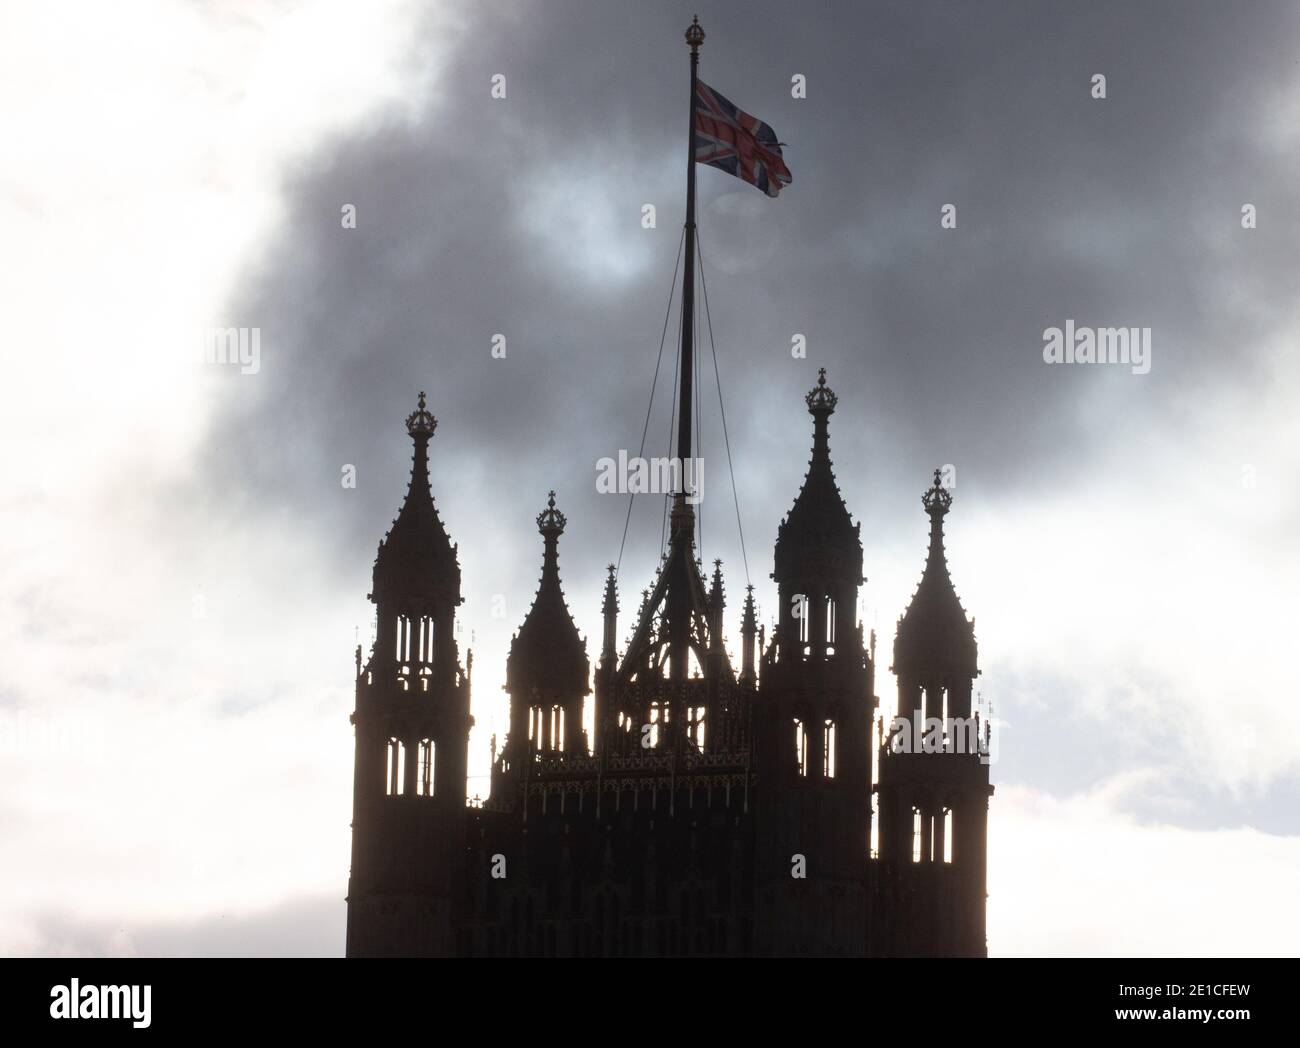 The Tower of Palace of Westminster above the House of Lords with the Union flag flying. Stock Photo